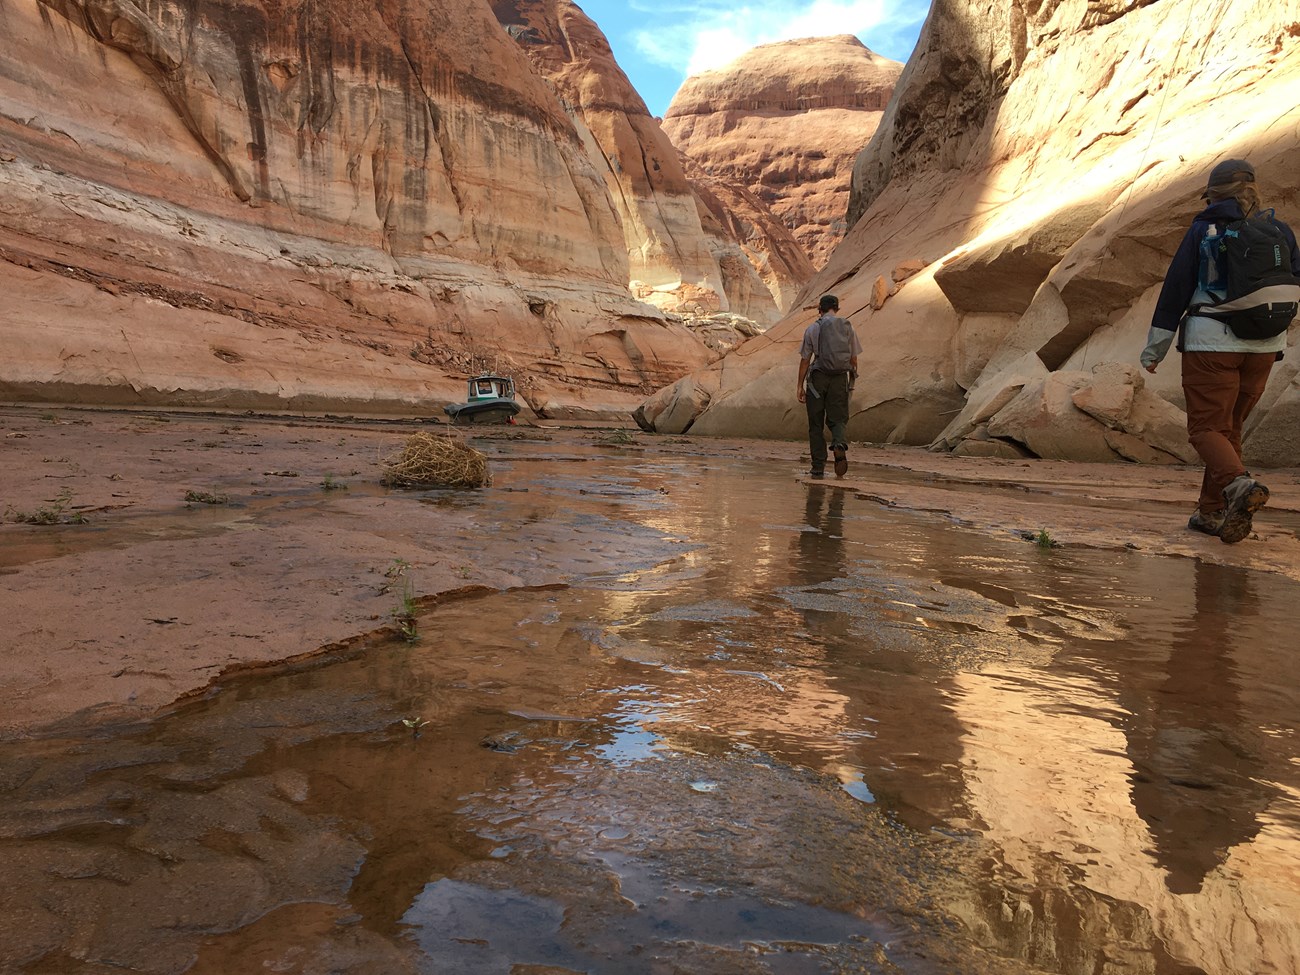 Two park rangers walk away from the camera towards a boat beached in a trickle of water in deep canyons.rds